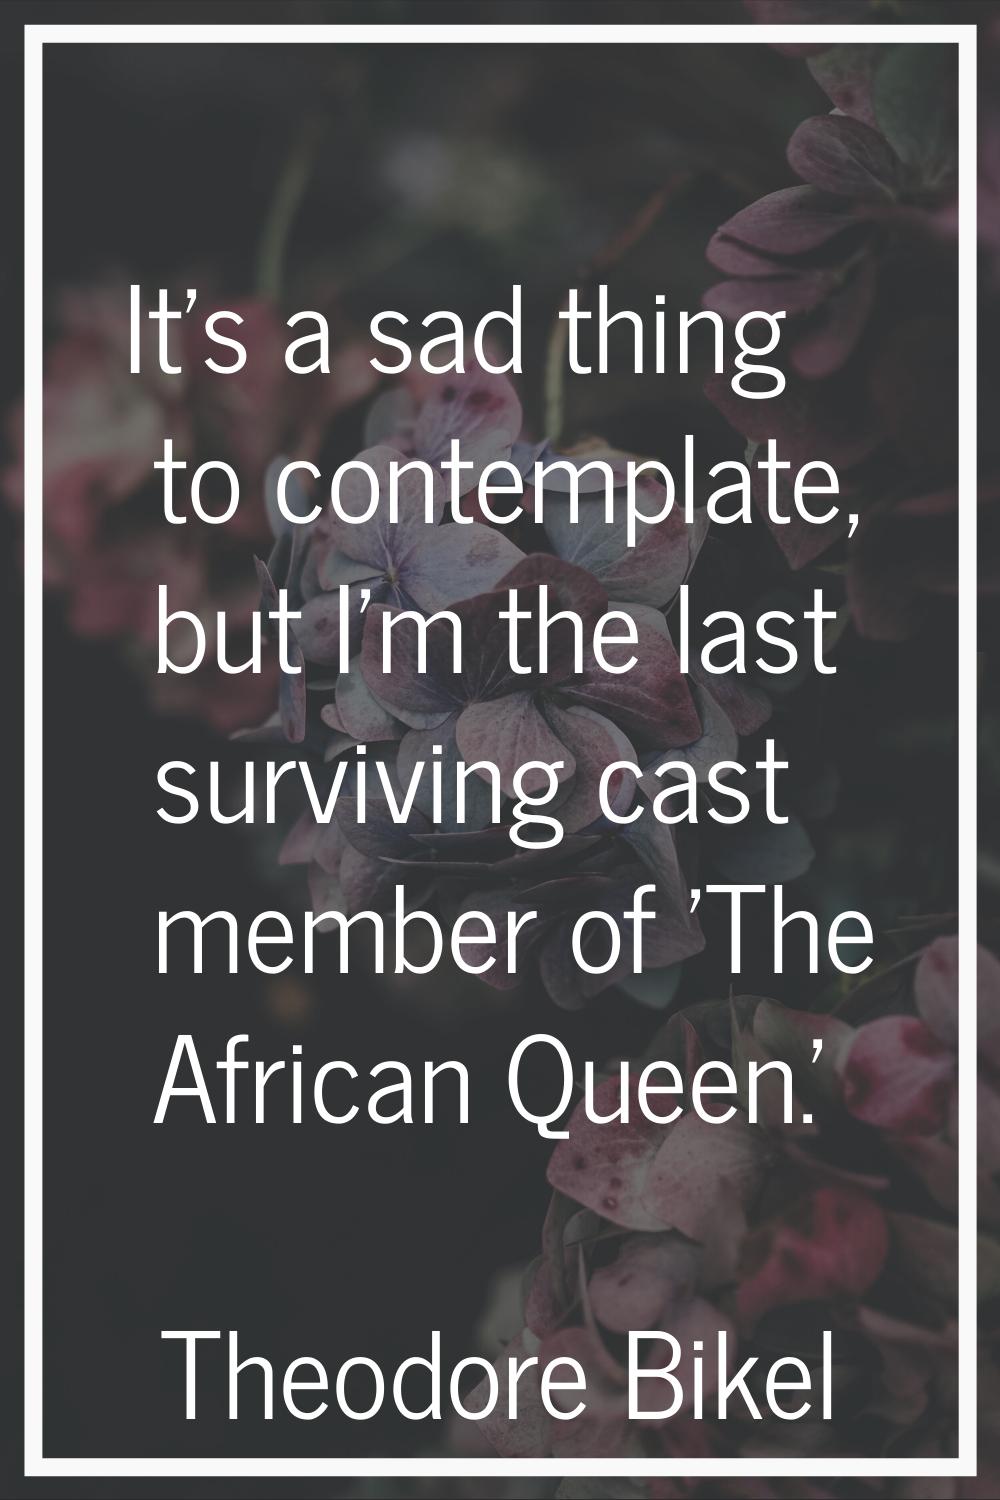 It's a sad thing to contemplate, but I'm the last surviving cast member of 'The African Queen.'